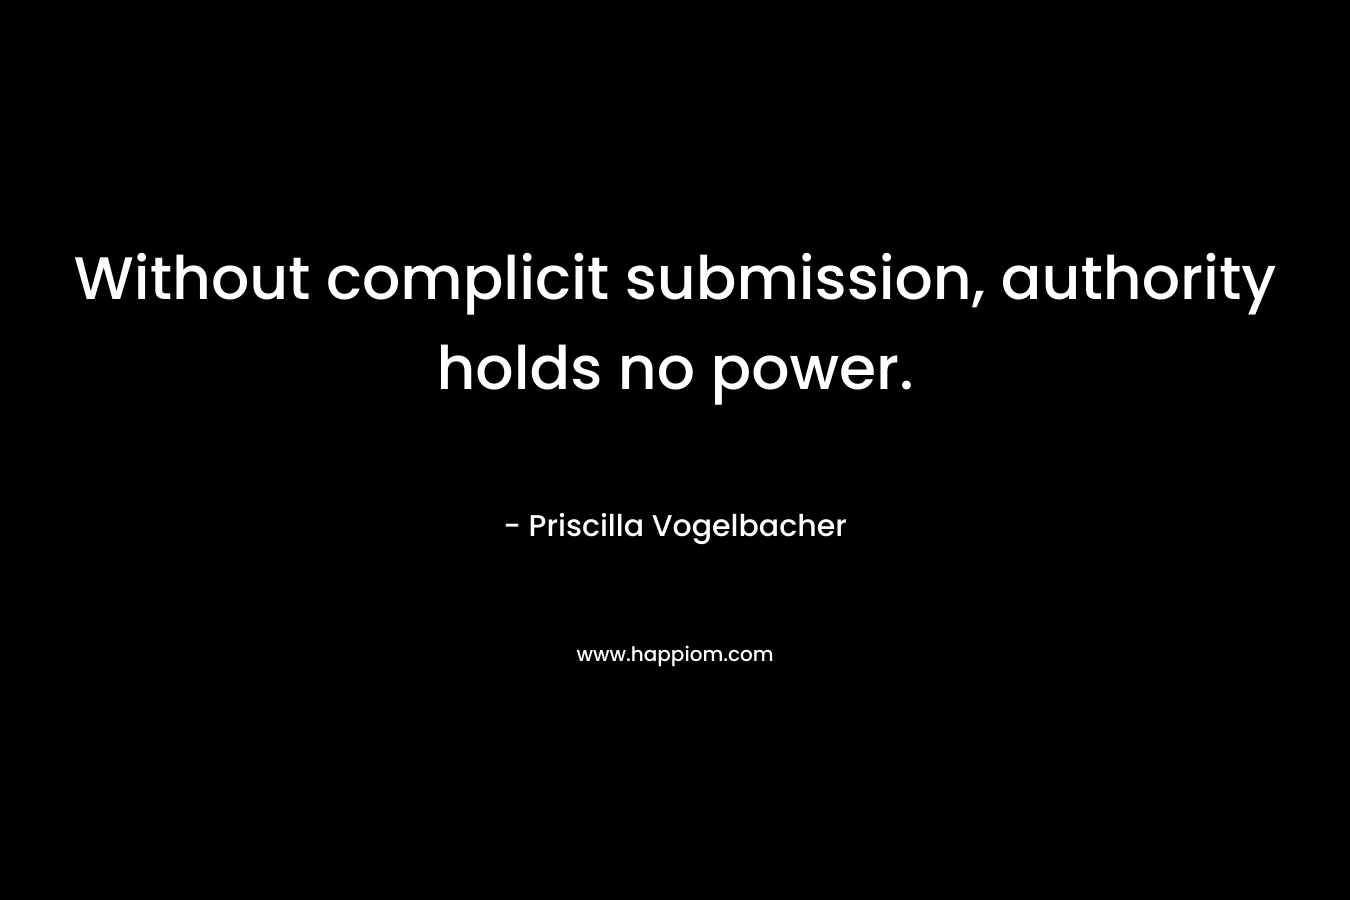 Without complicit submission, authority holds no power.